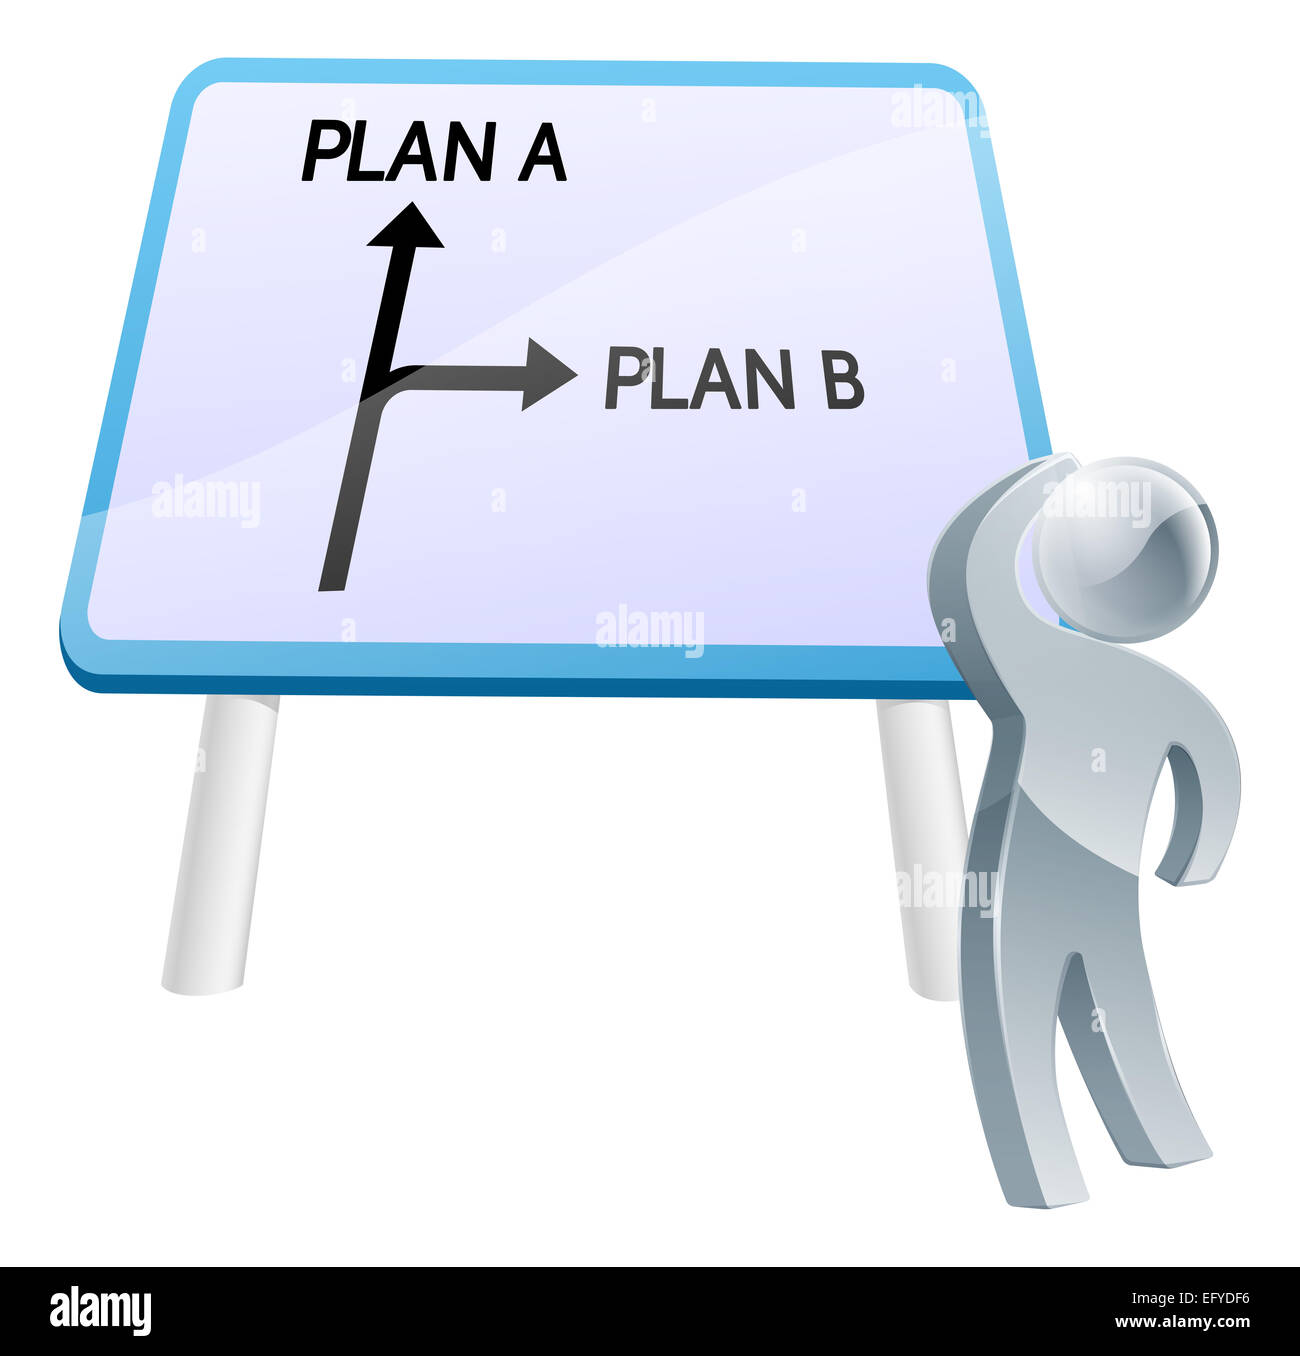 A man looking up at a direction road sign with the words plan a and plan b on it Stock Photo